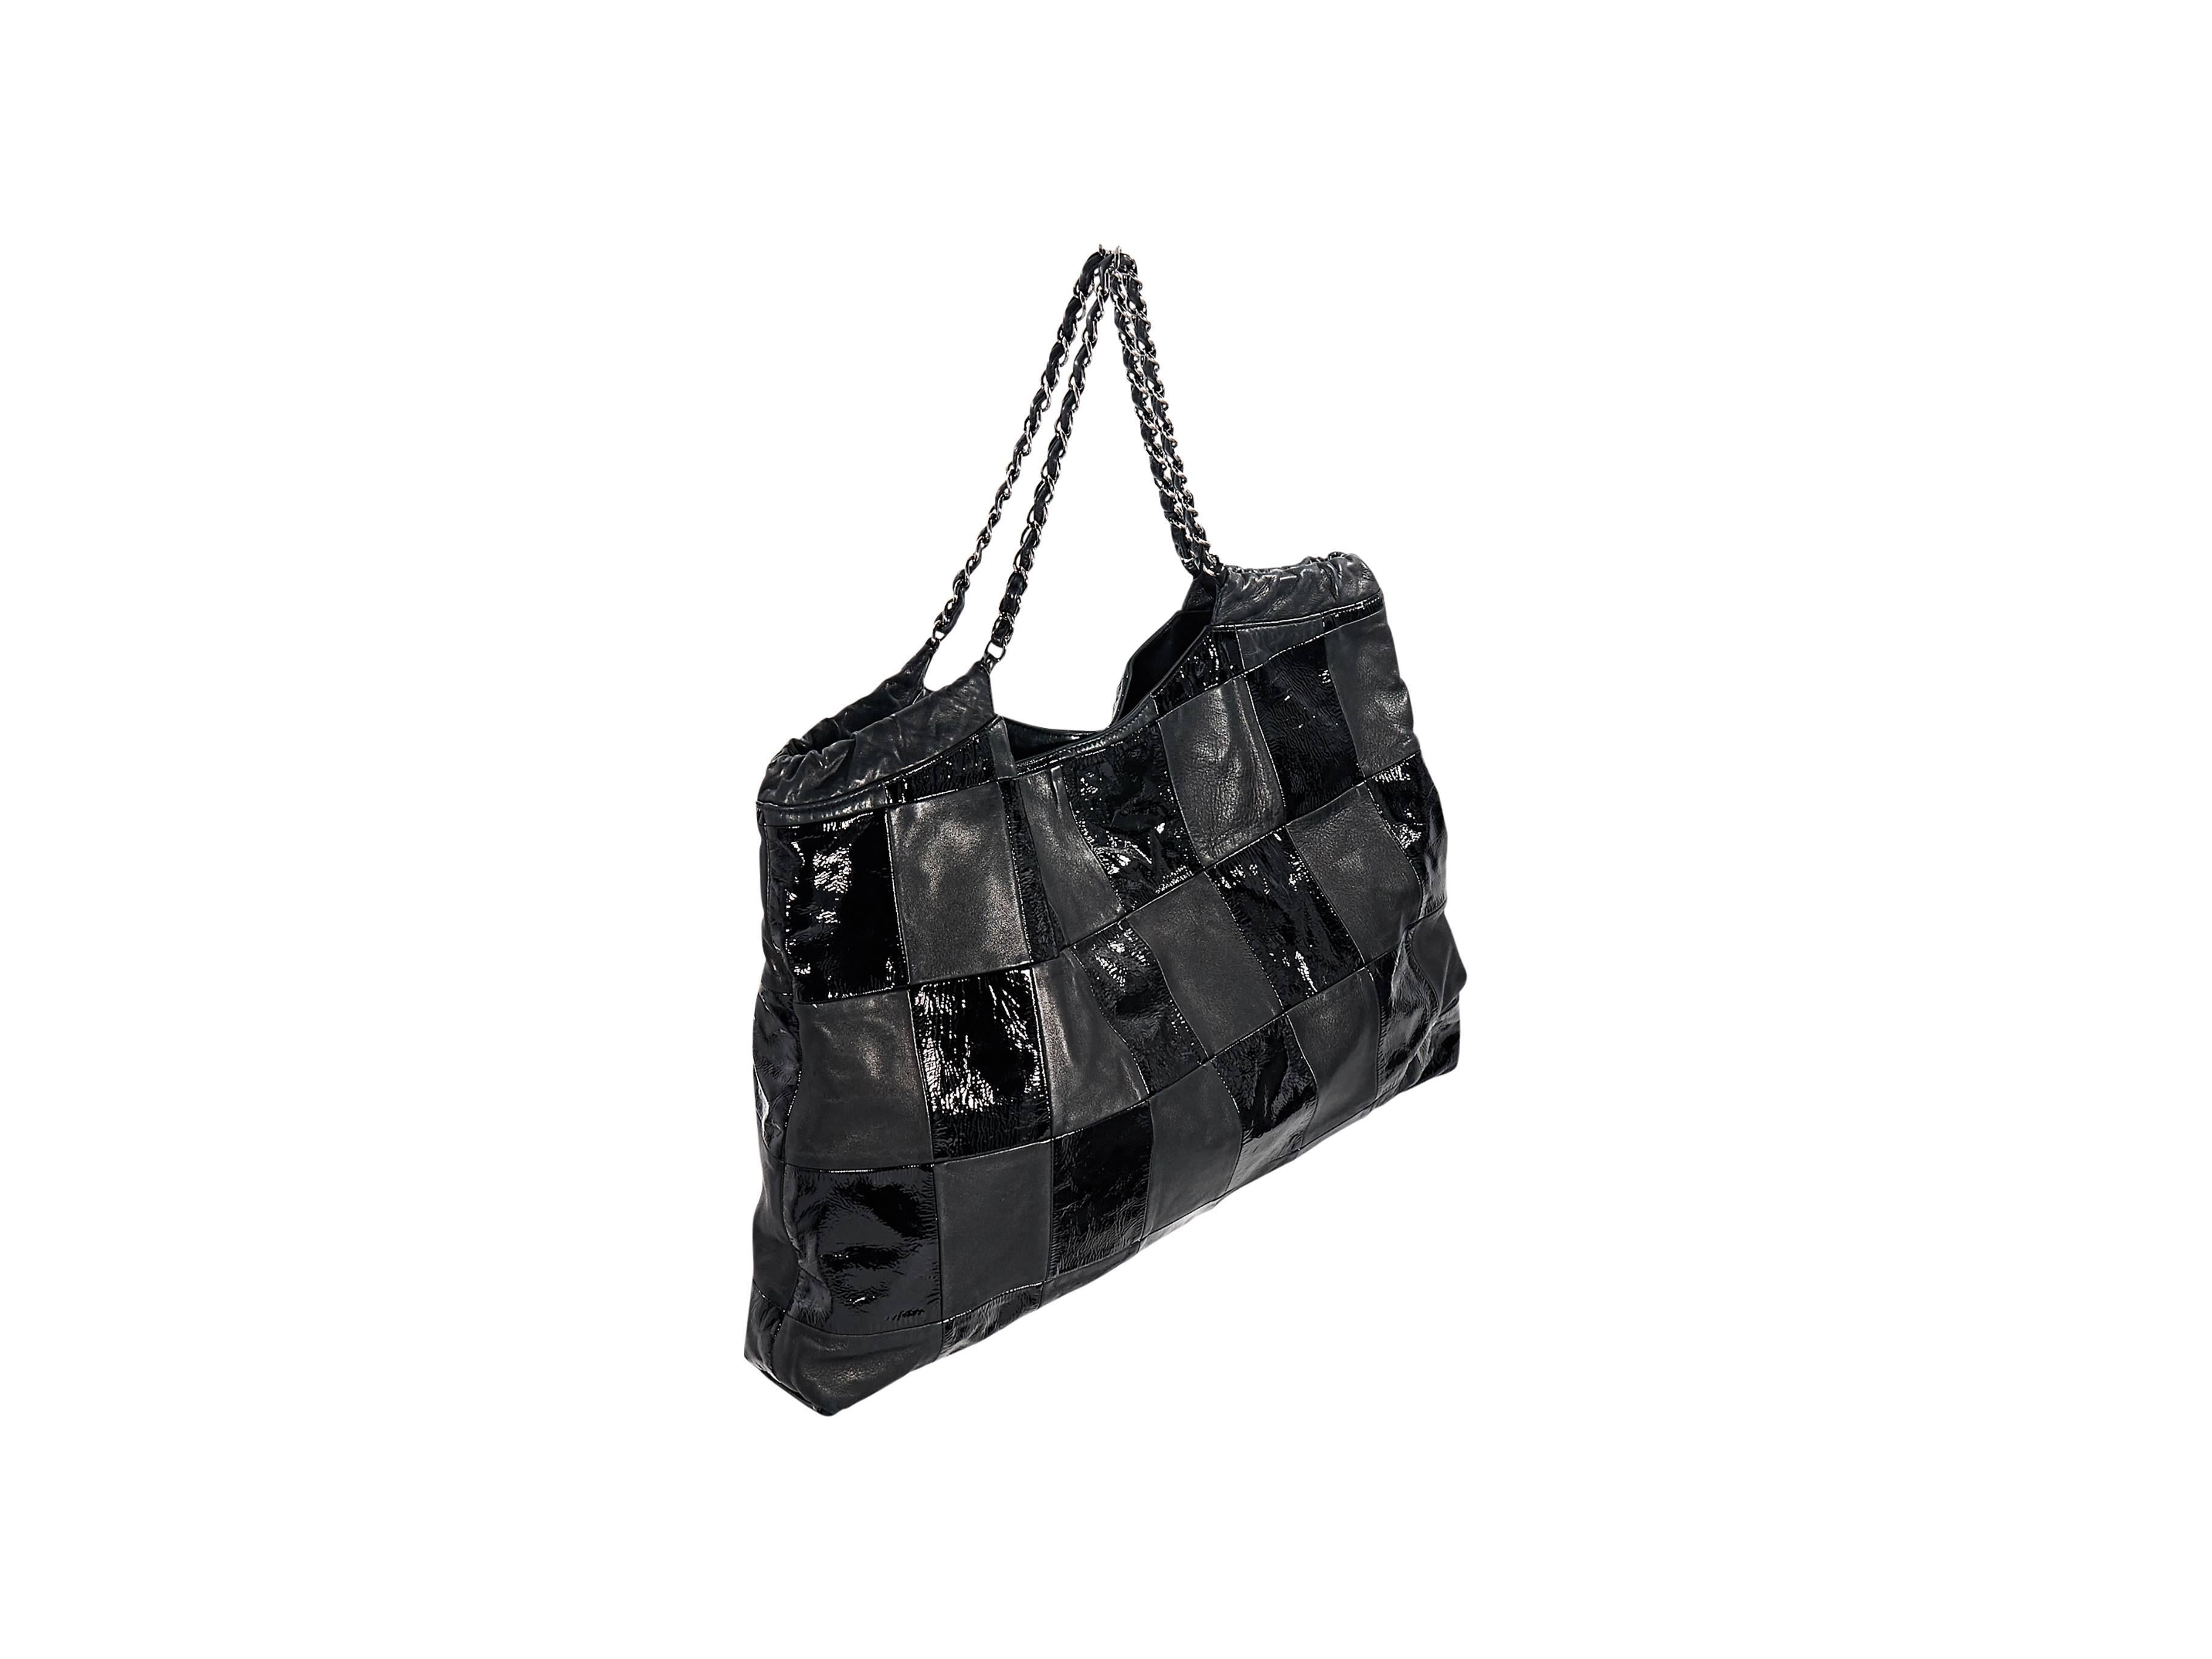 Product details:  Black leather Brooklyn Cabas tote bag by Chanel.  Patchwork leather and patent leather design.  Chain shoulder straps.  Magnetic snap closure.  Lined interior with inner slide and zip pockets plus key fob.  21